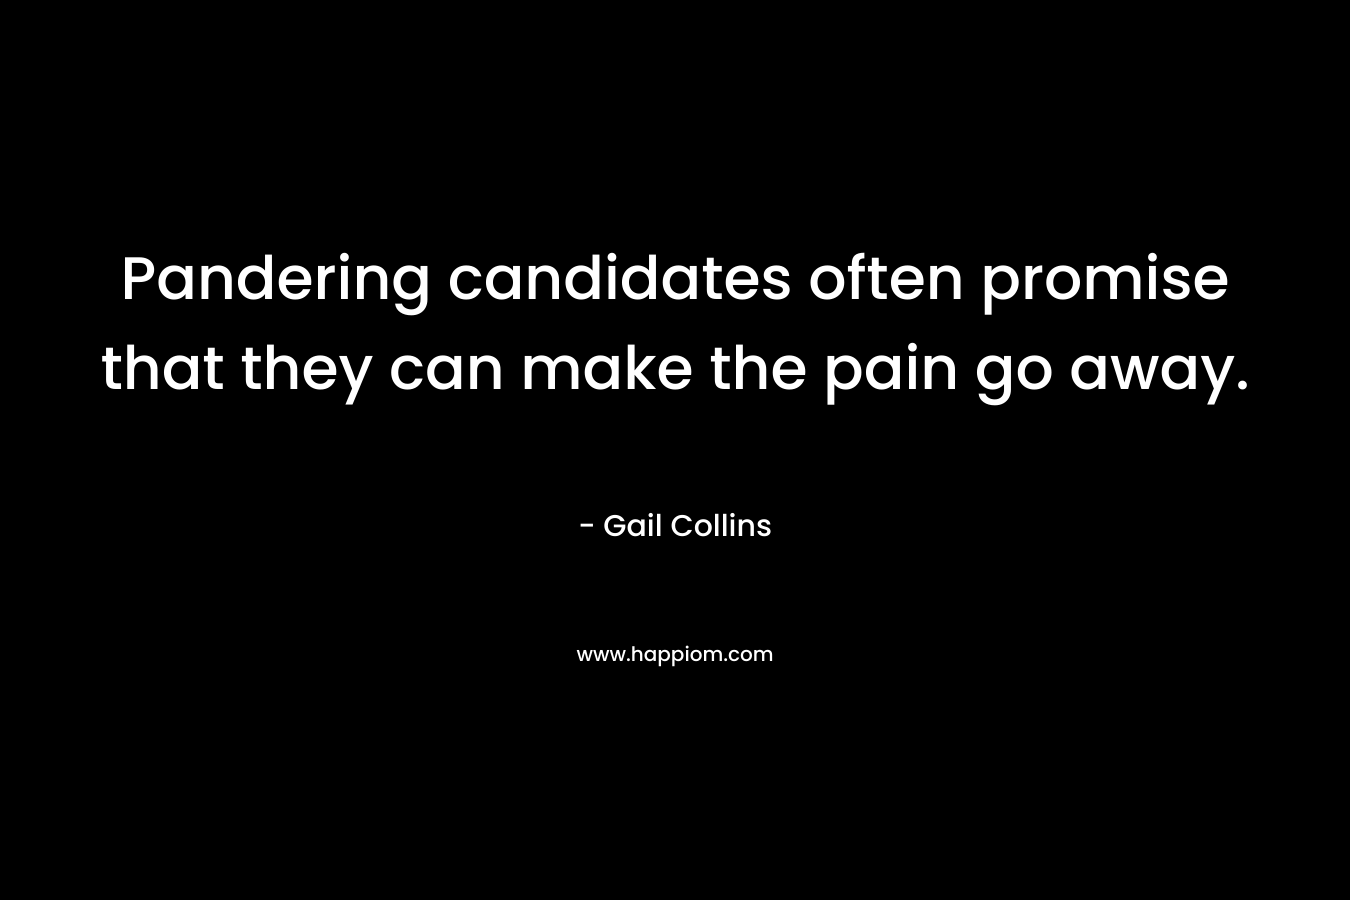 Pandering candidates often promise that they can make the pain go away.